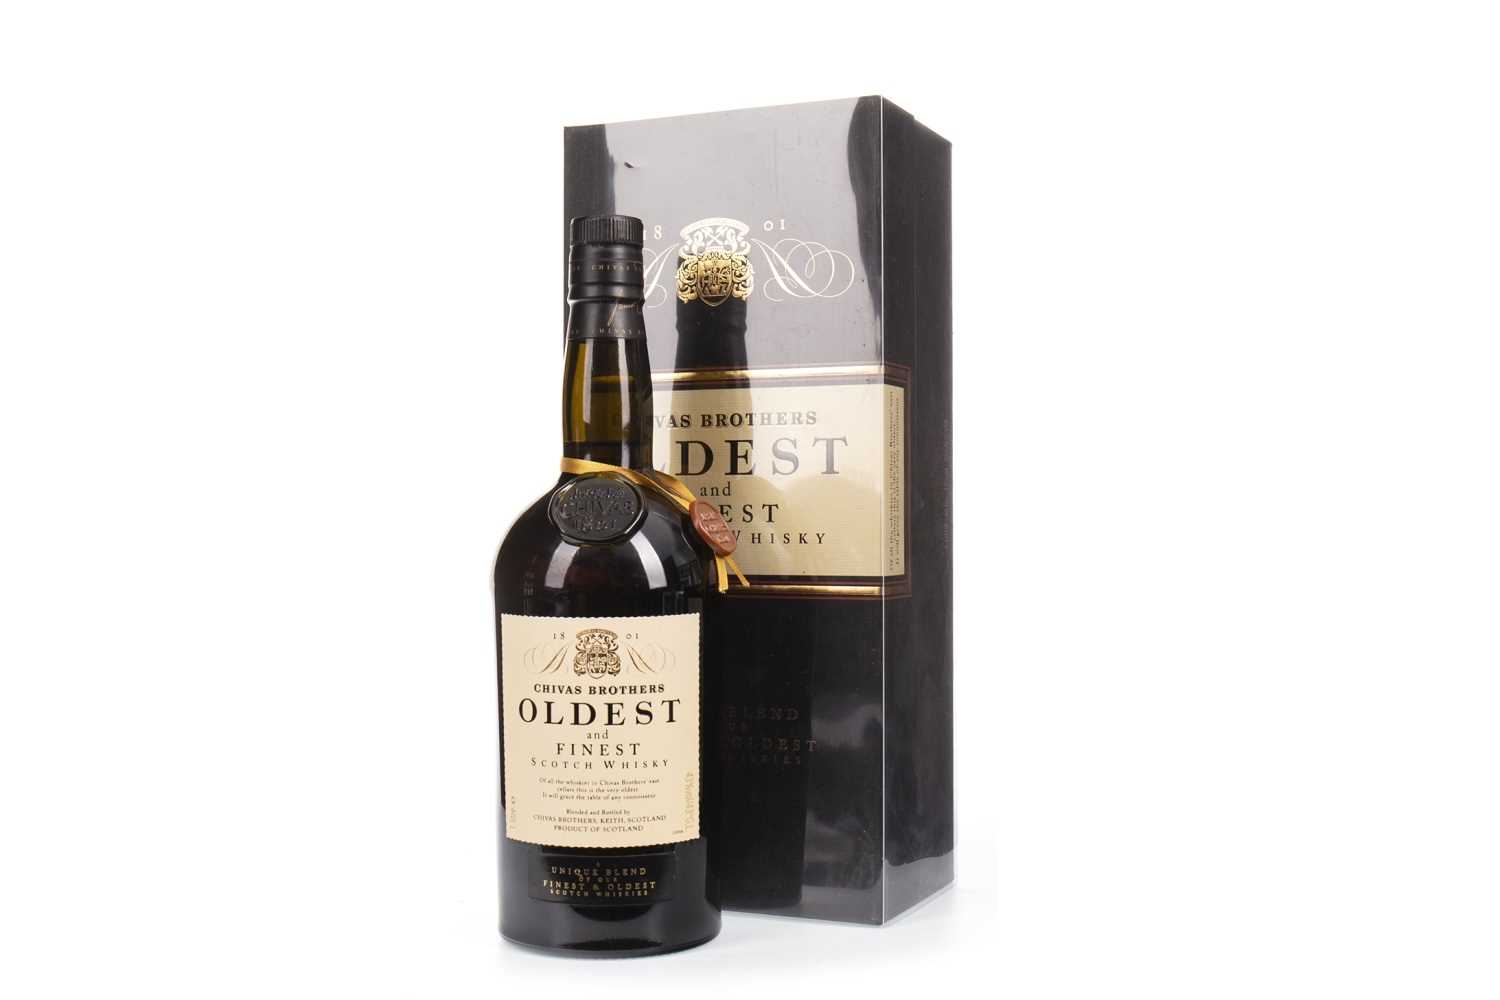 Lot 453 - CHIVAS BROTHERS OLDEST AND FINEST